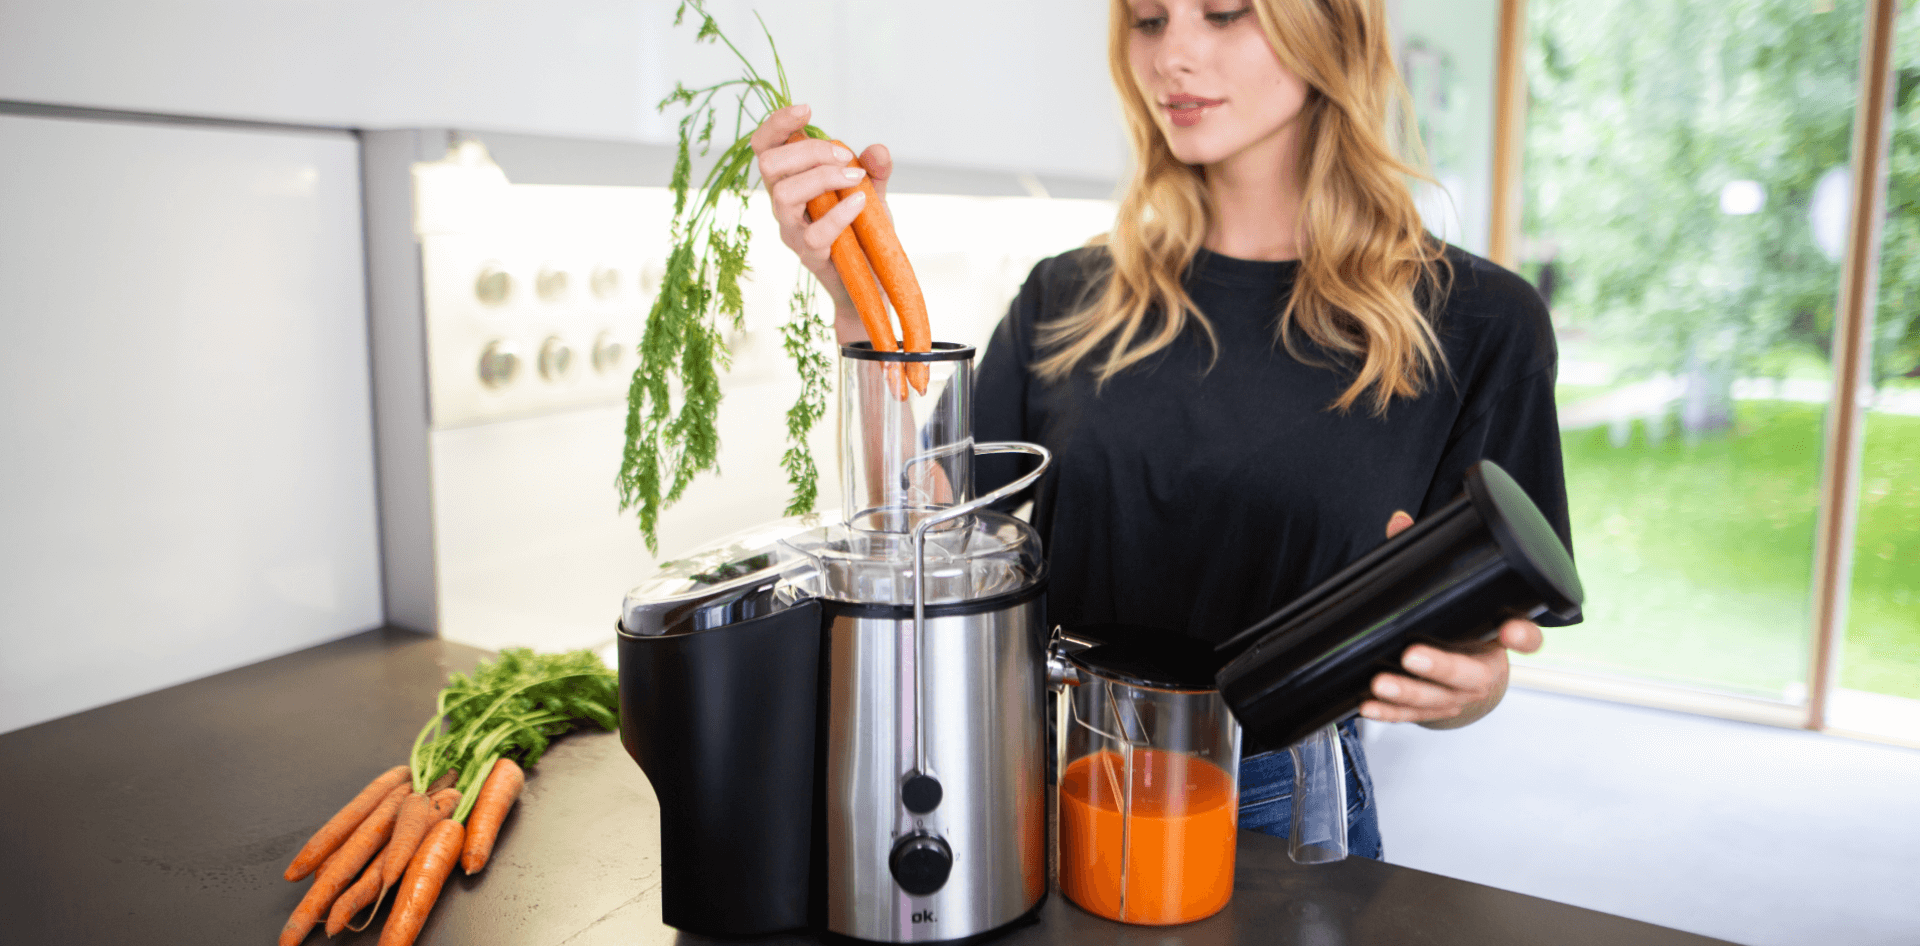 A young woman using an ok. juicer with a bunch of carrots, in a modern kitchen with a view of her garden